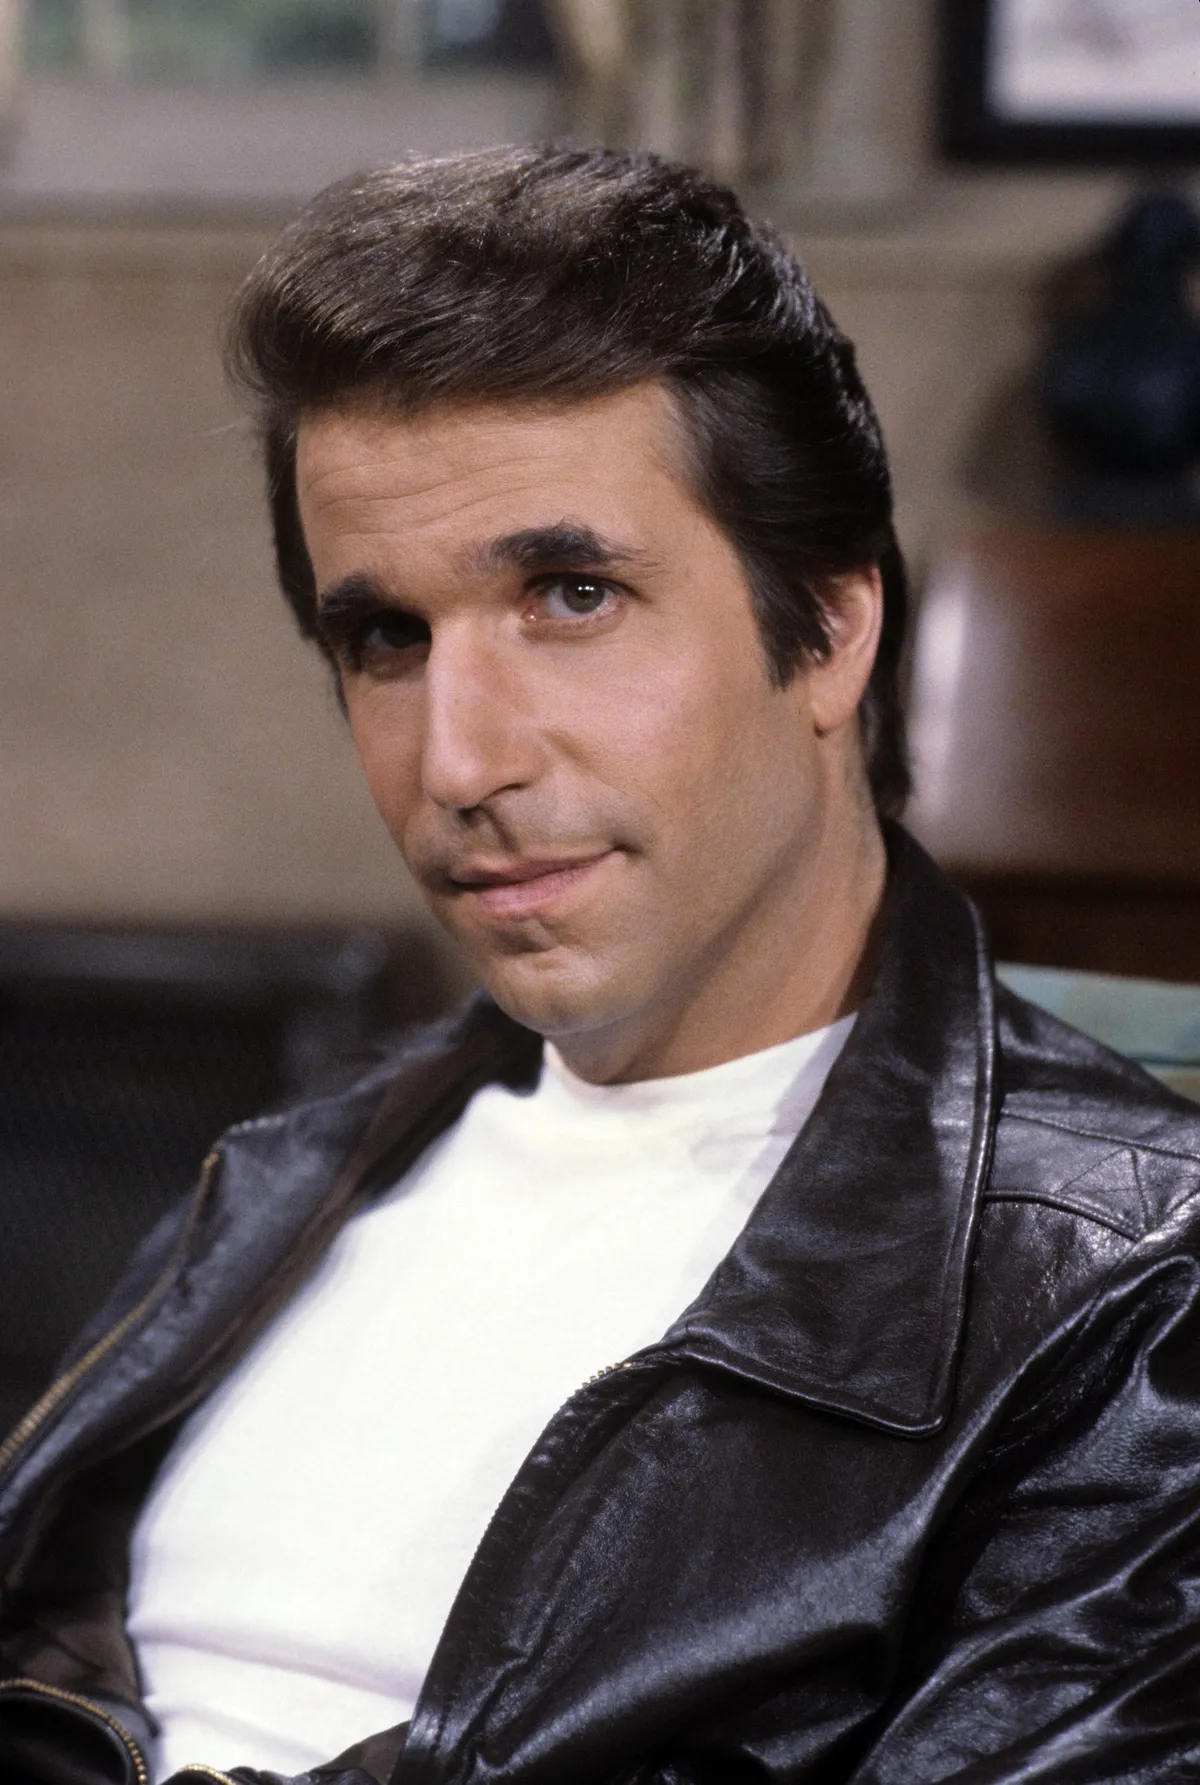 Actor Henry Winkler as Fonzie on the sitcom "Happy Days" on October 6, 1981. | Source: Getty Images